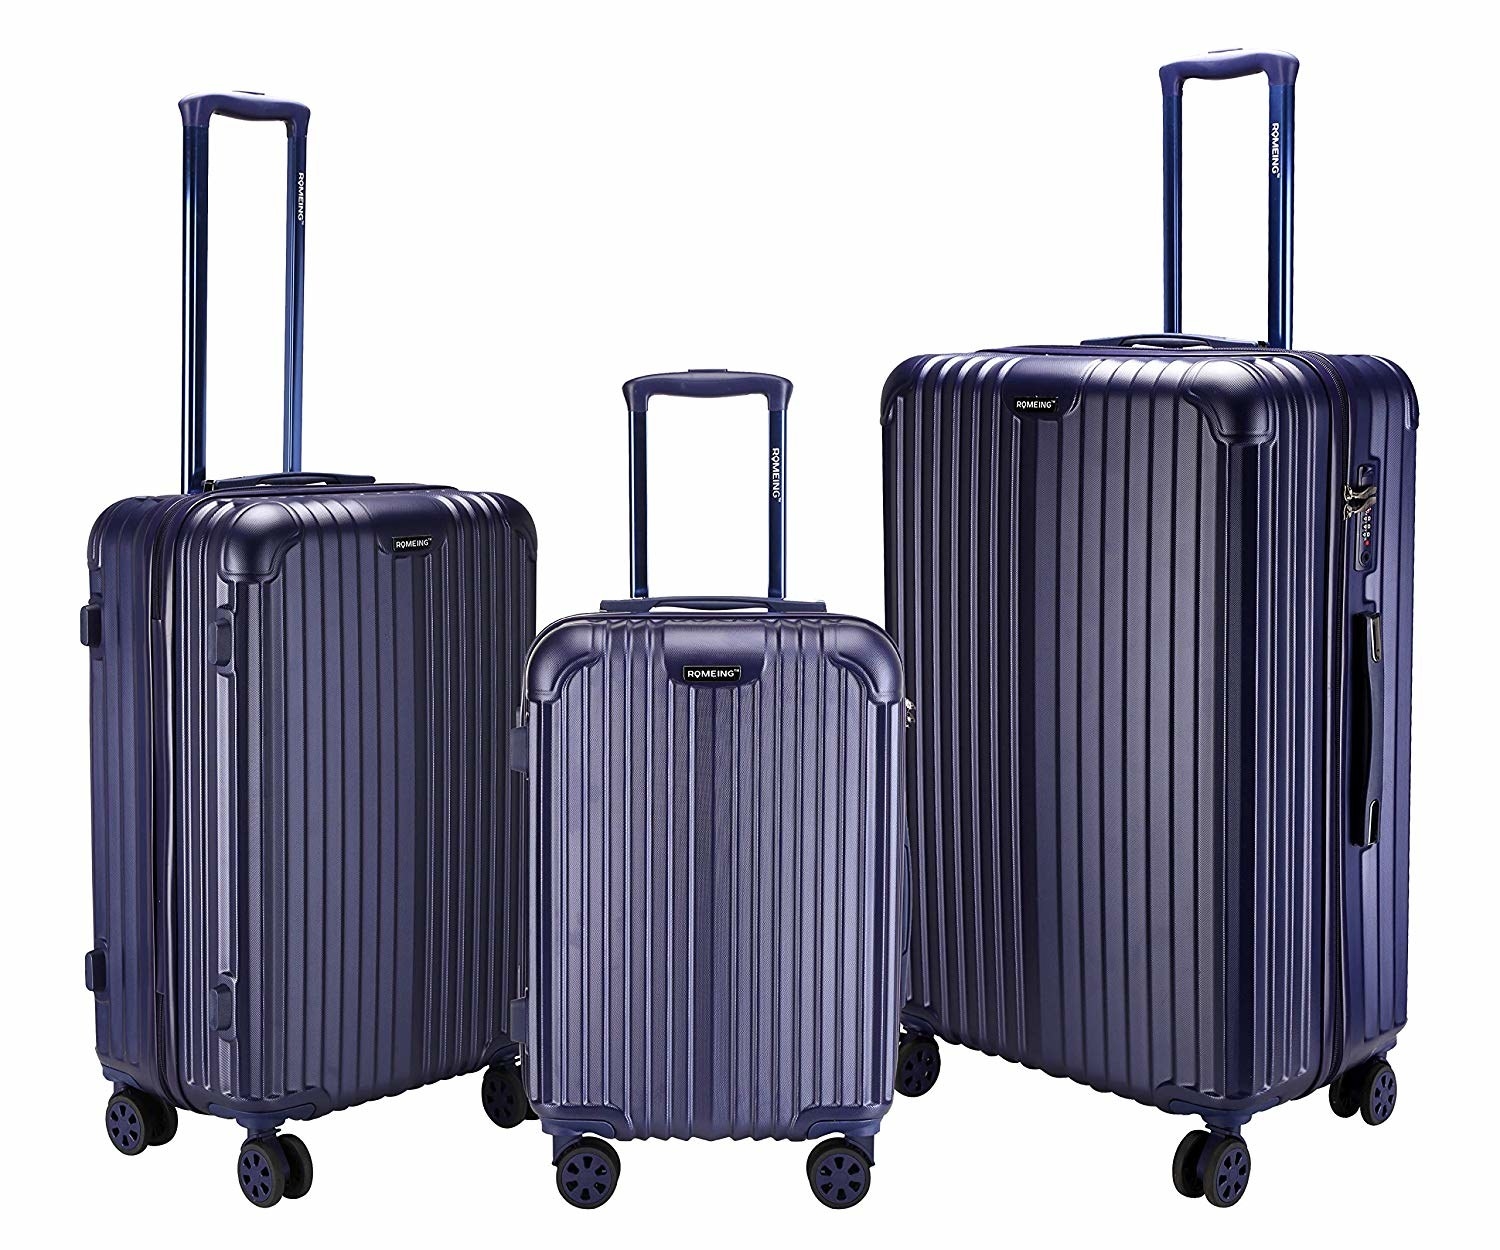 ROMEING Tuscany 24 inch, Polypropylene Luggage, Hard-Sided, (Sky Blue 65  cms) Check-in Trolley Bag - Price History